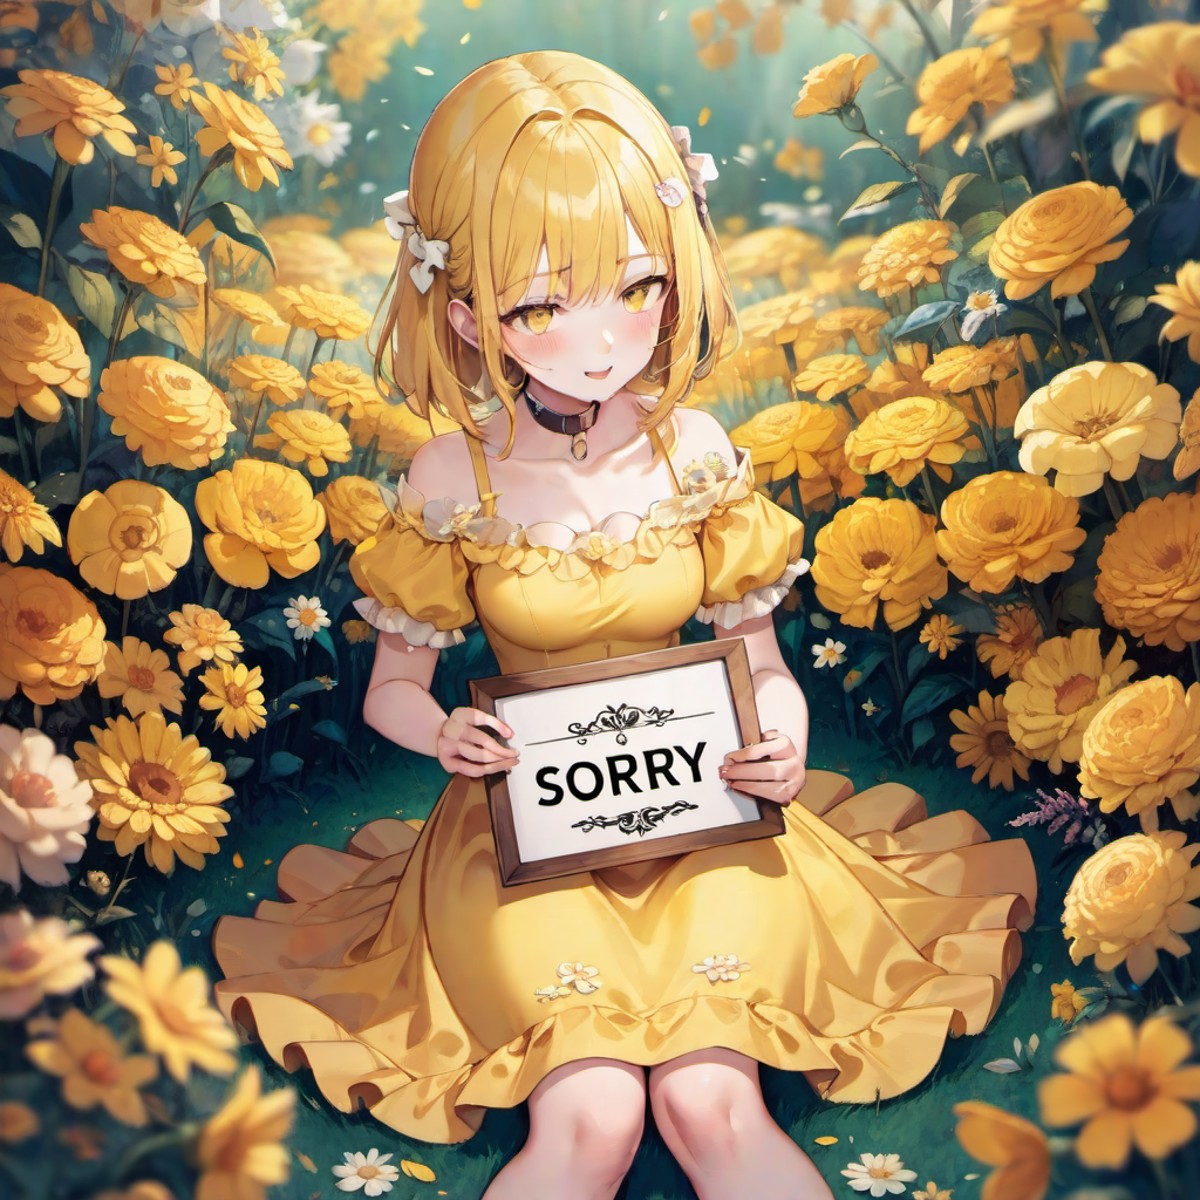 The girl in a yellow dress is sitting in the flowers holding the sorry sign,Holding a wooden plaque with sorry written on it,